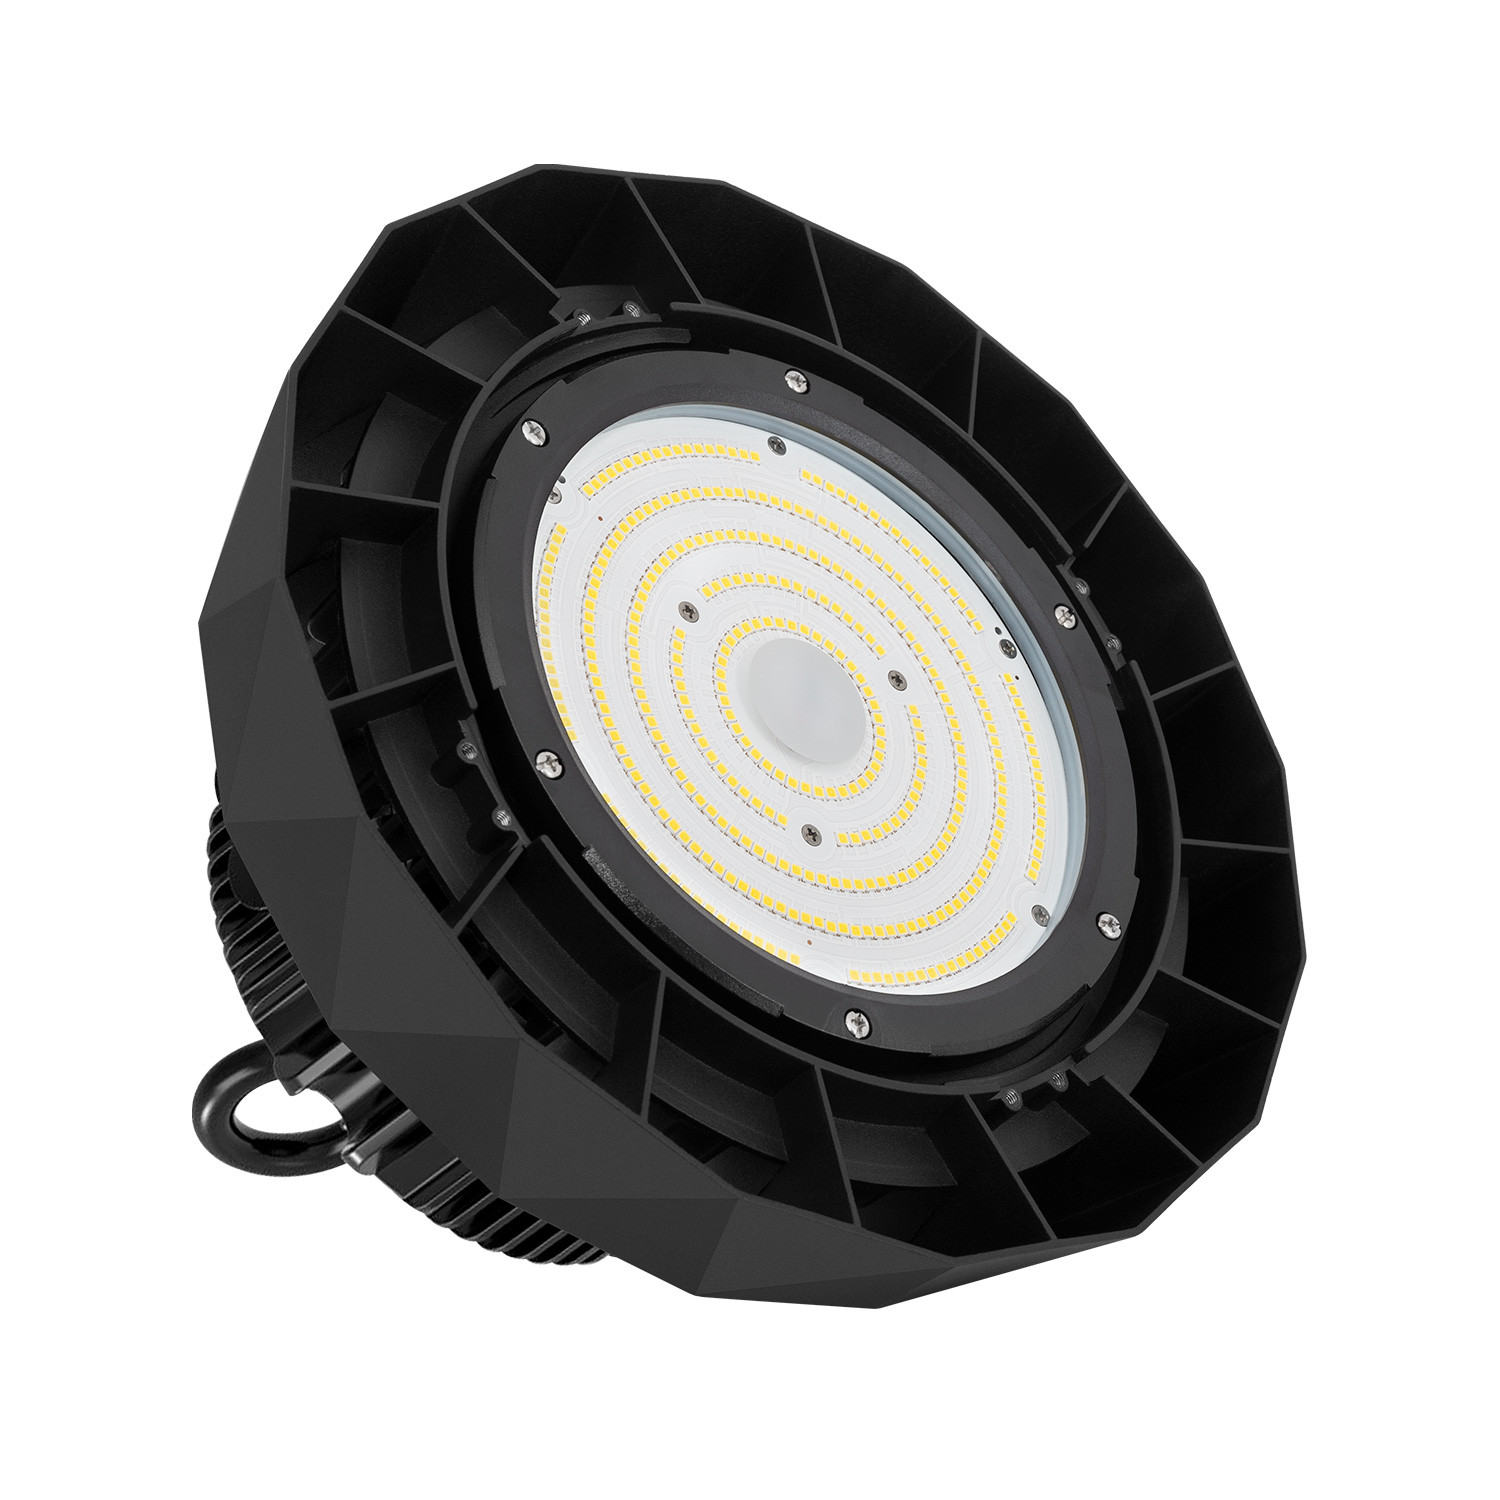 SAMSUNG UFO LED Bell 200W 170lm / W MEAN WELL Dimmable Color Temperature: White 5000K